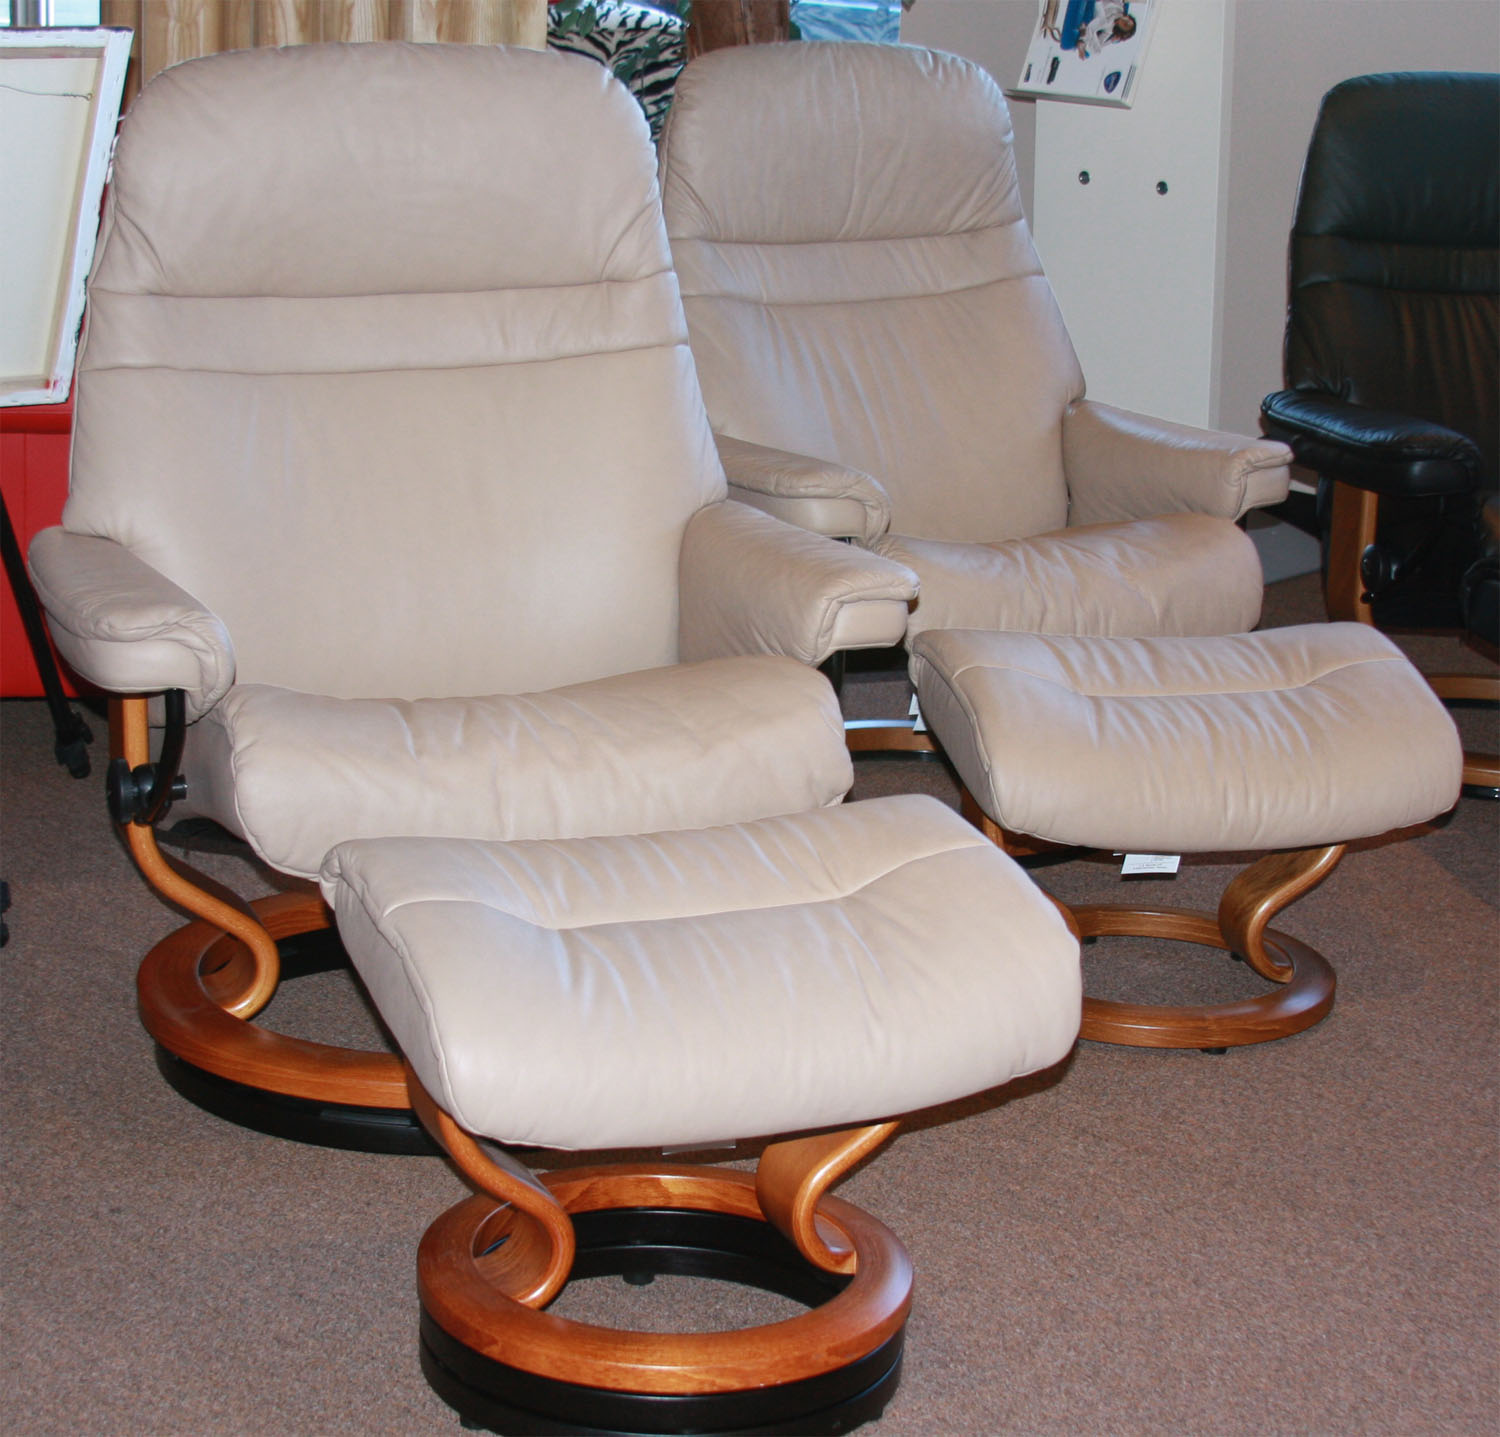 Stressless Sunrise Recliner in Sand Paloma Leather